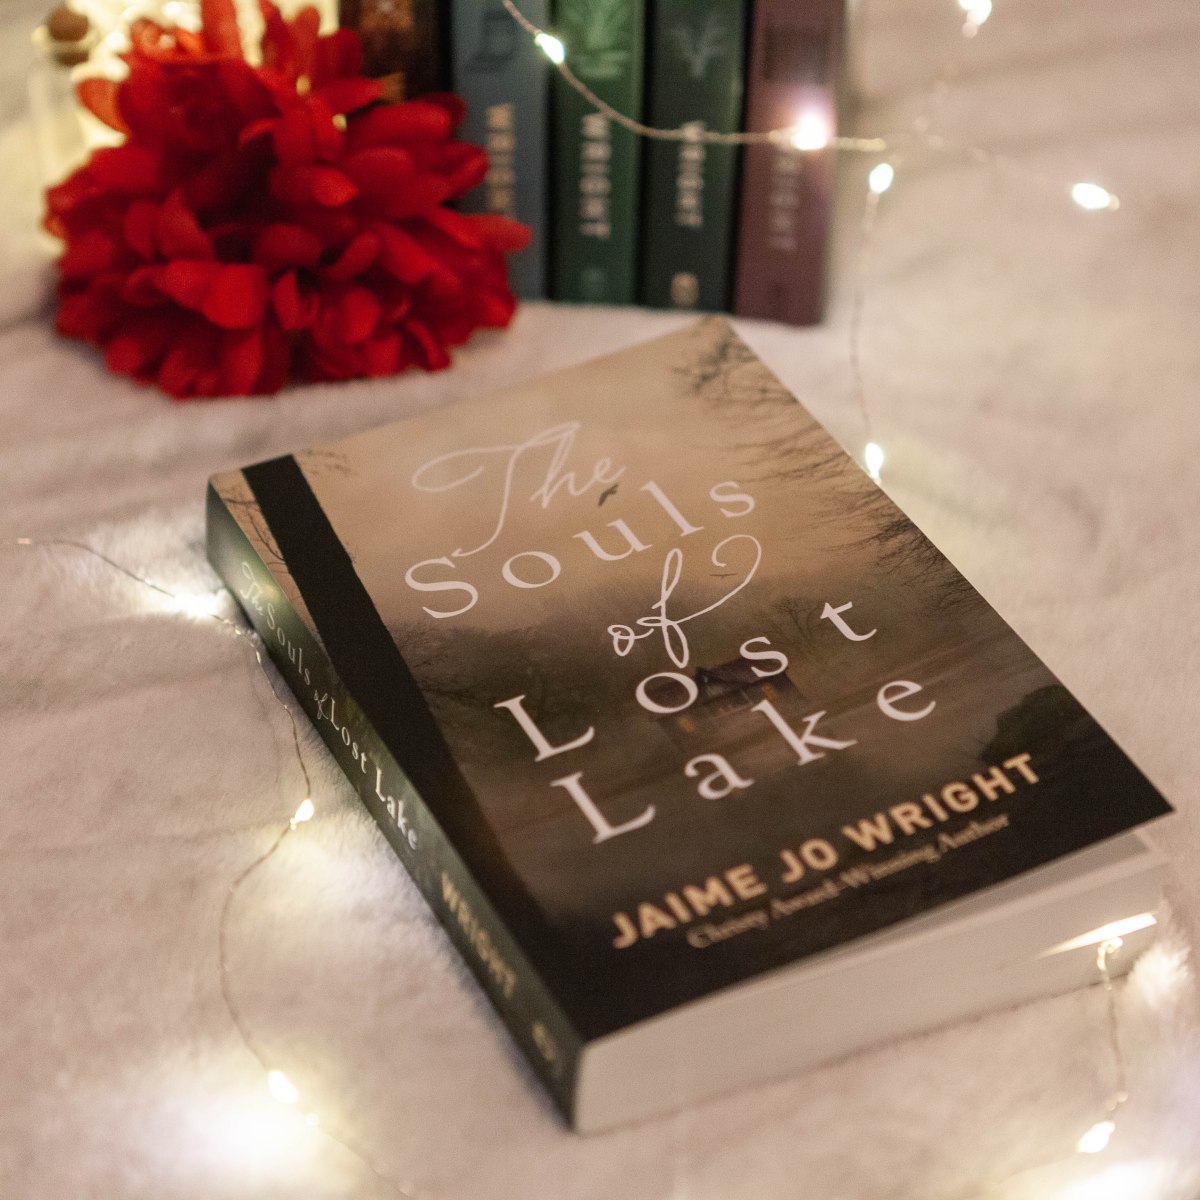 The Souls of Lost Lake by Jaime Jo Wright